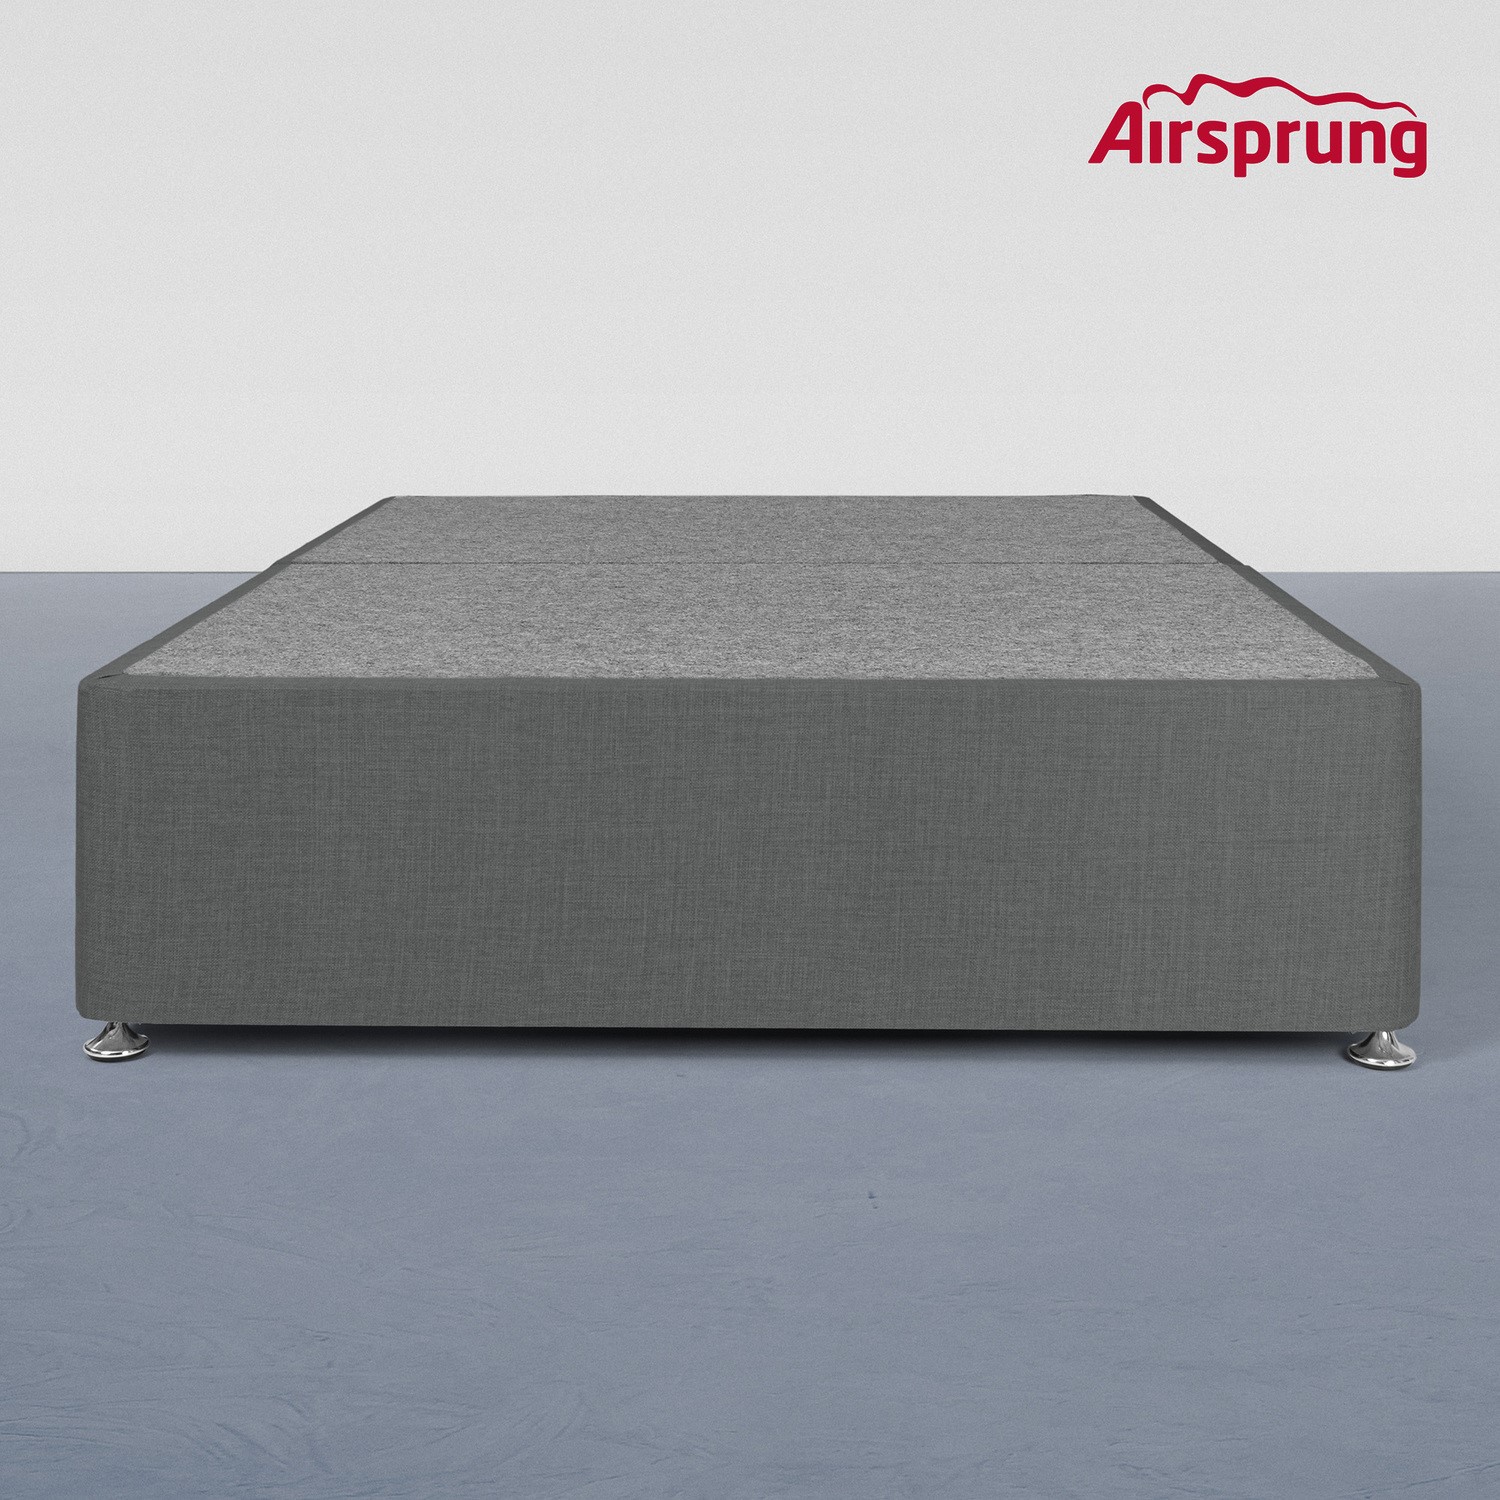 Read more about Airsprung kelston small double 4 drawer divan charcoal